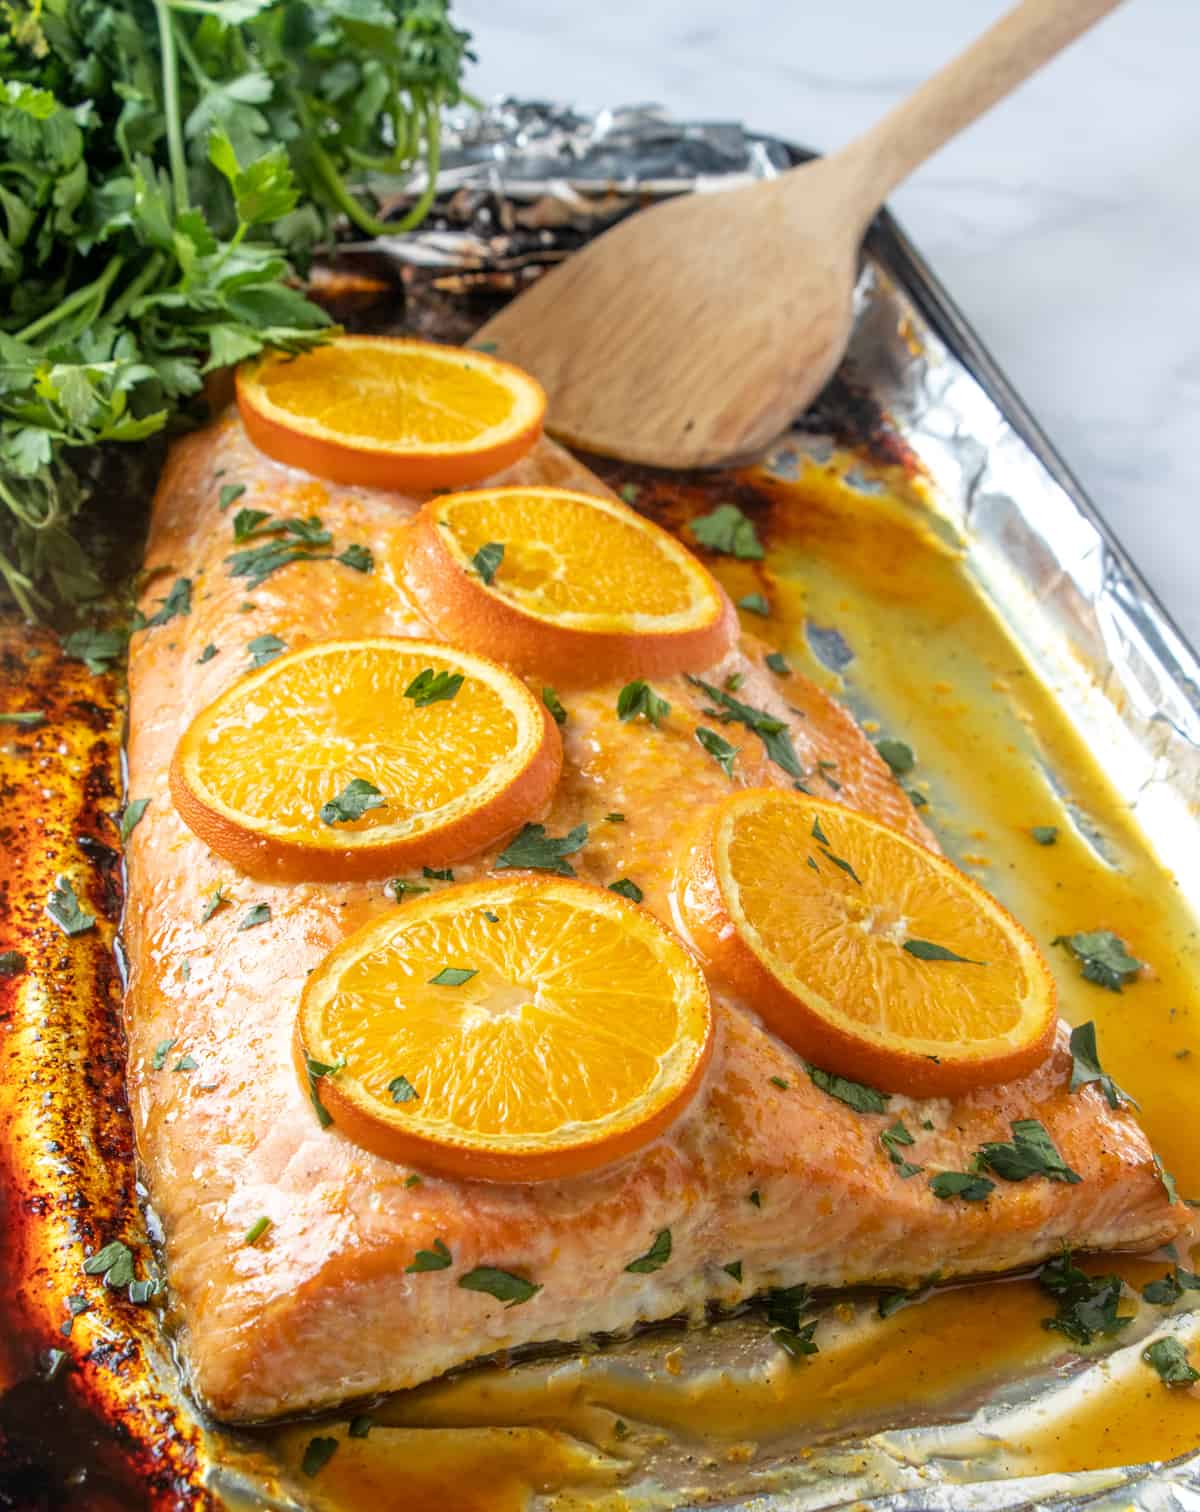 Large salmon filet baked with oranges and parsley